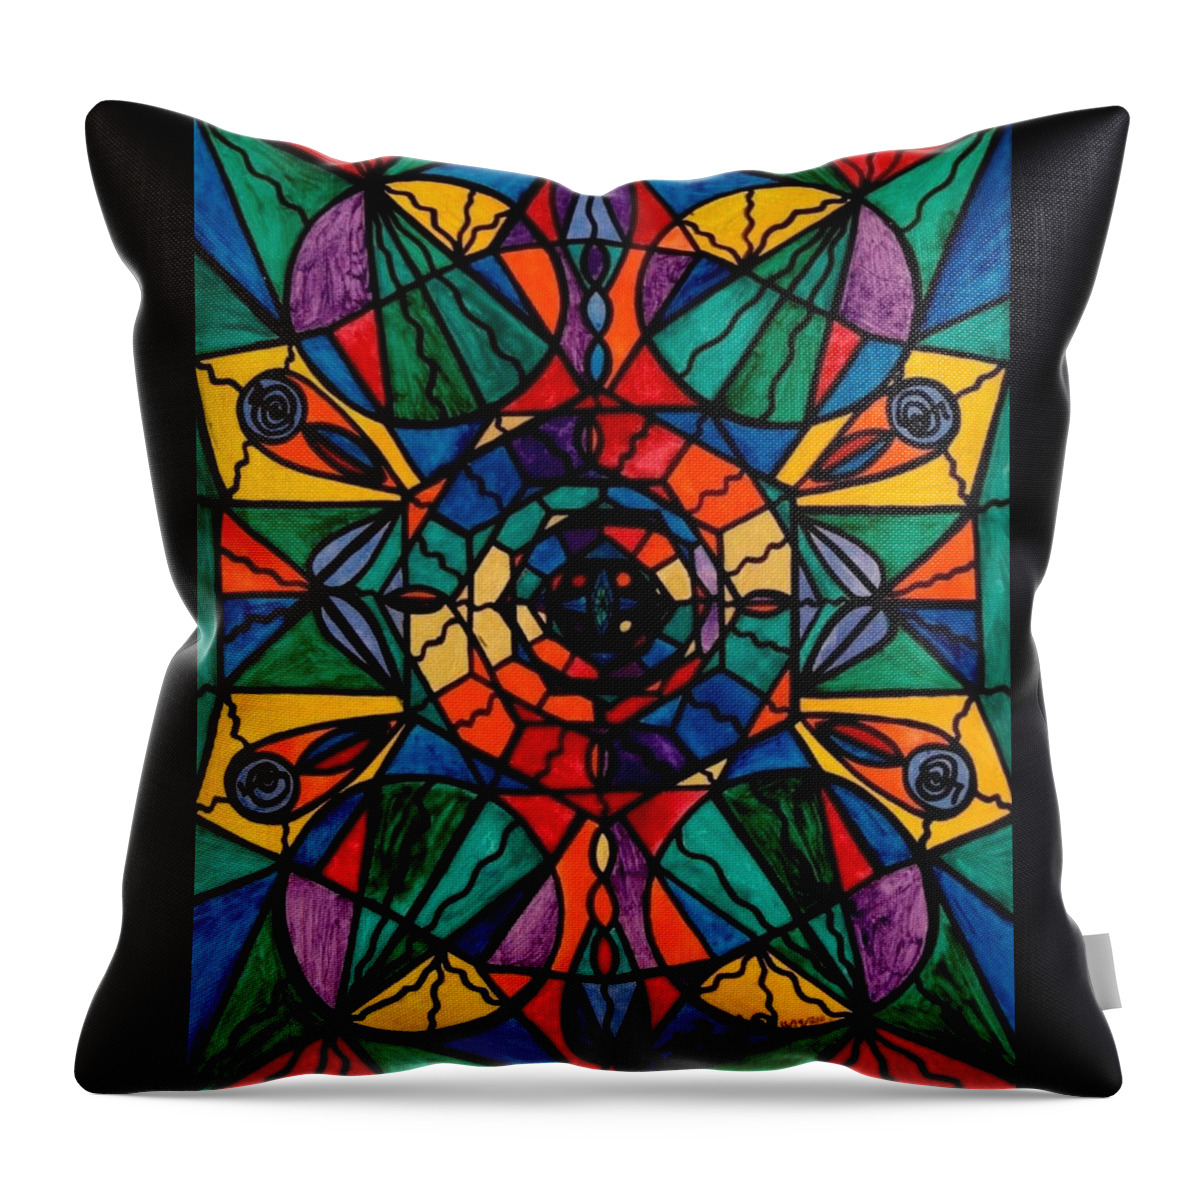 Alignment Throw Pillow featuring the painting Alignment by Teal Eye Print Store